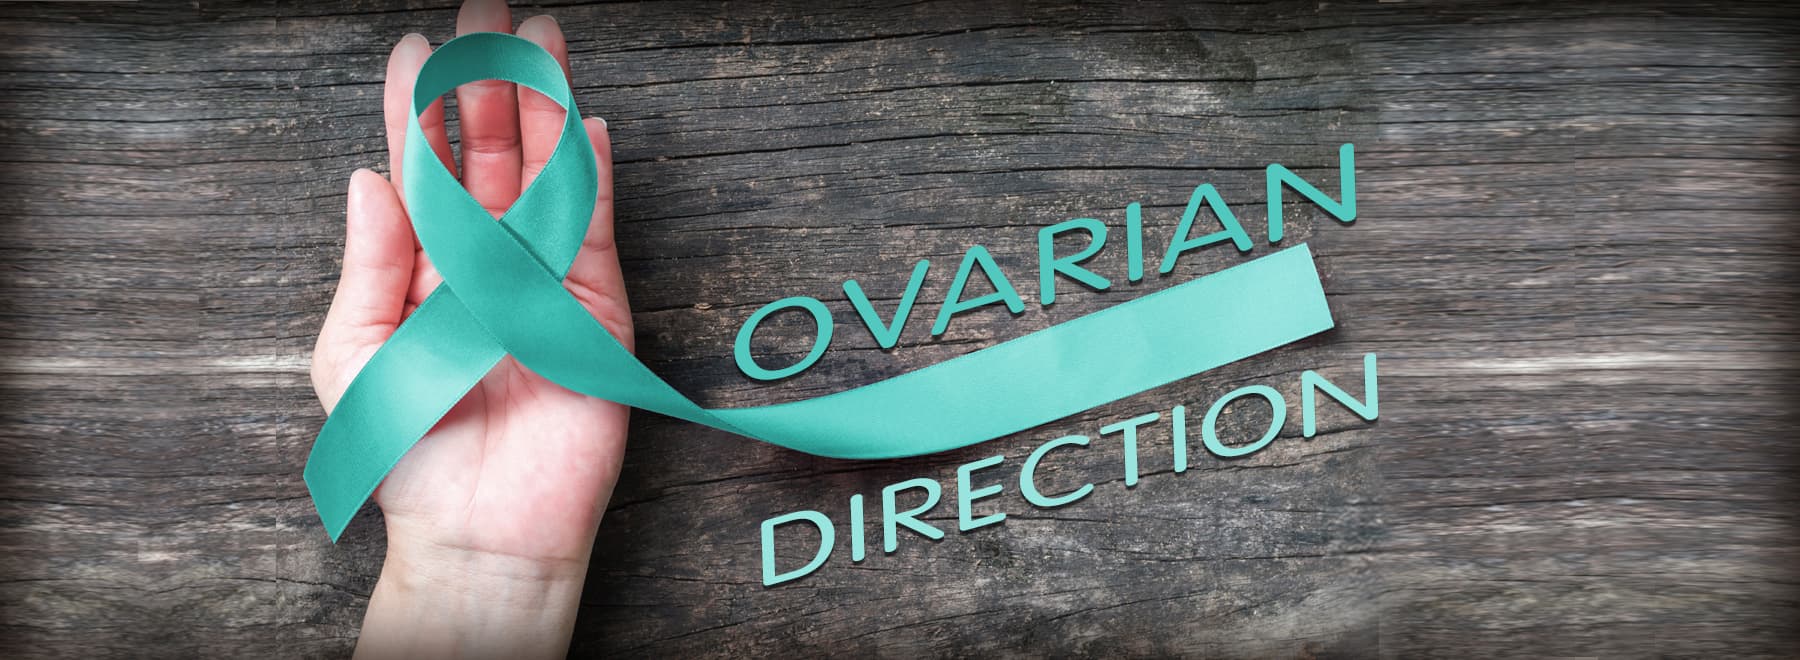 Hand holding ovarian cancer turquoise ribbon